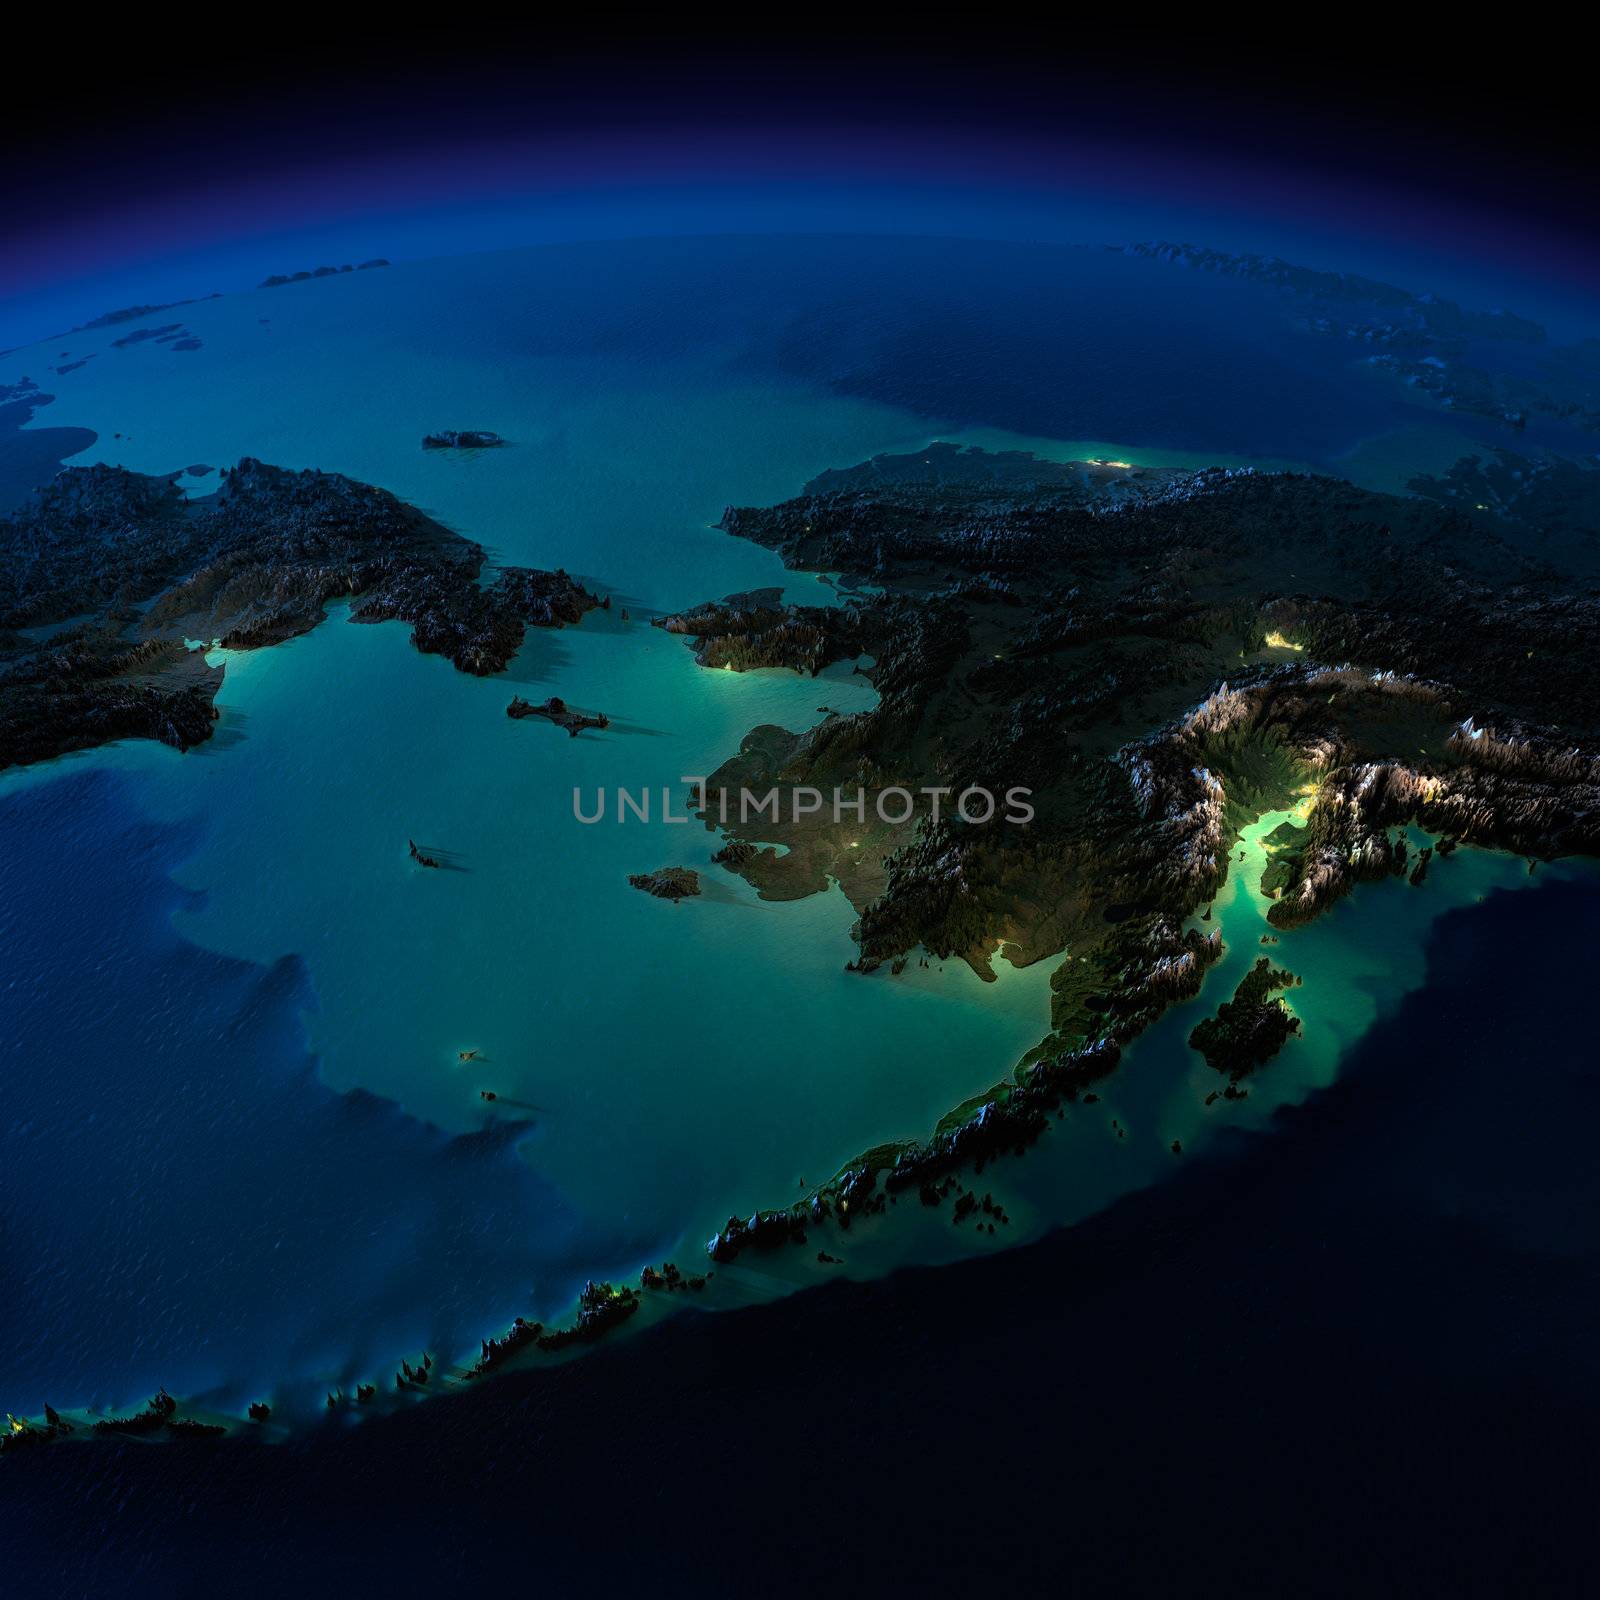 Night Earth. Alaska and the Bering Strait by Antartis